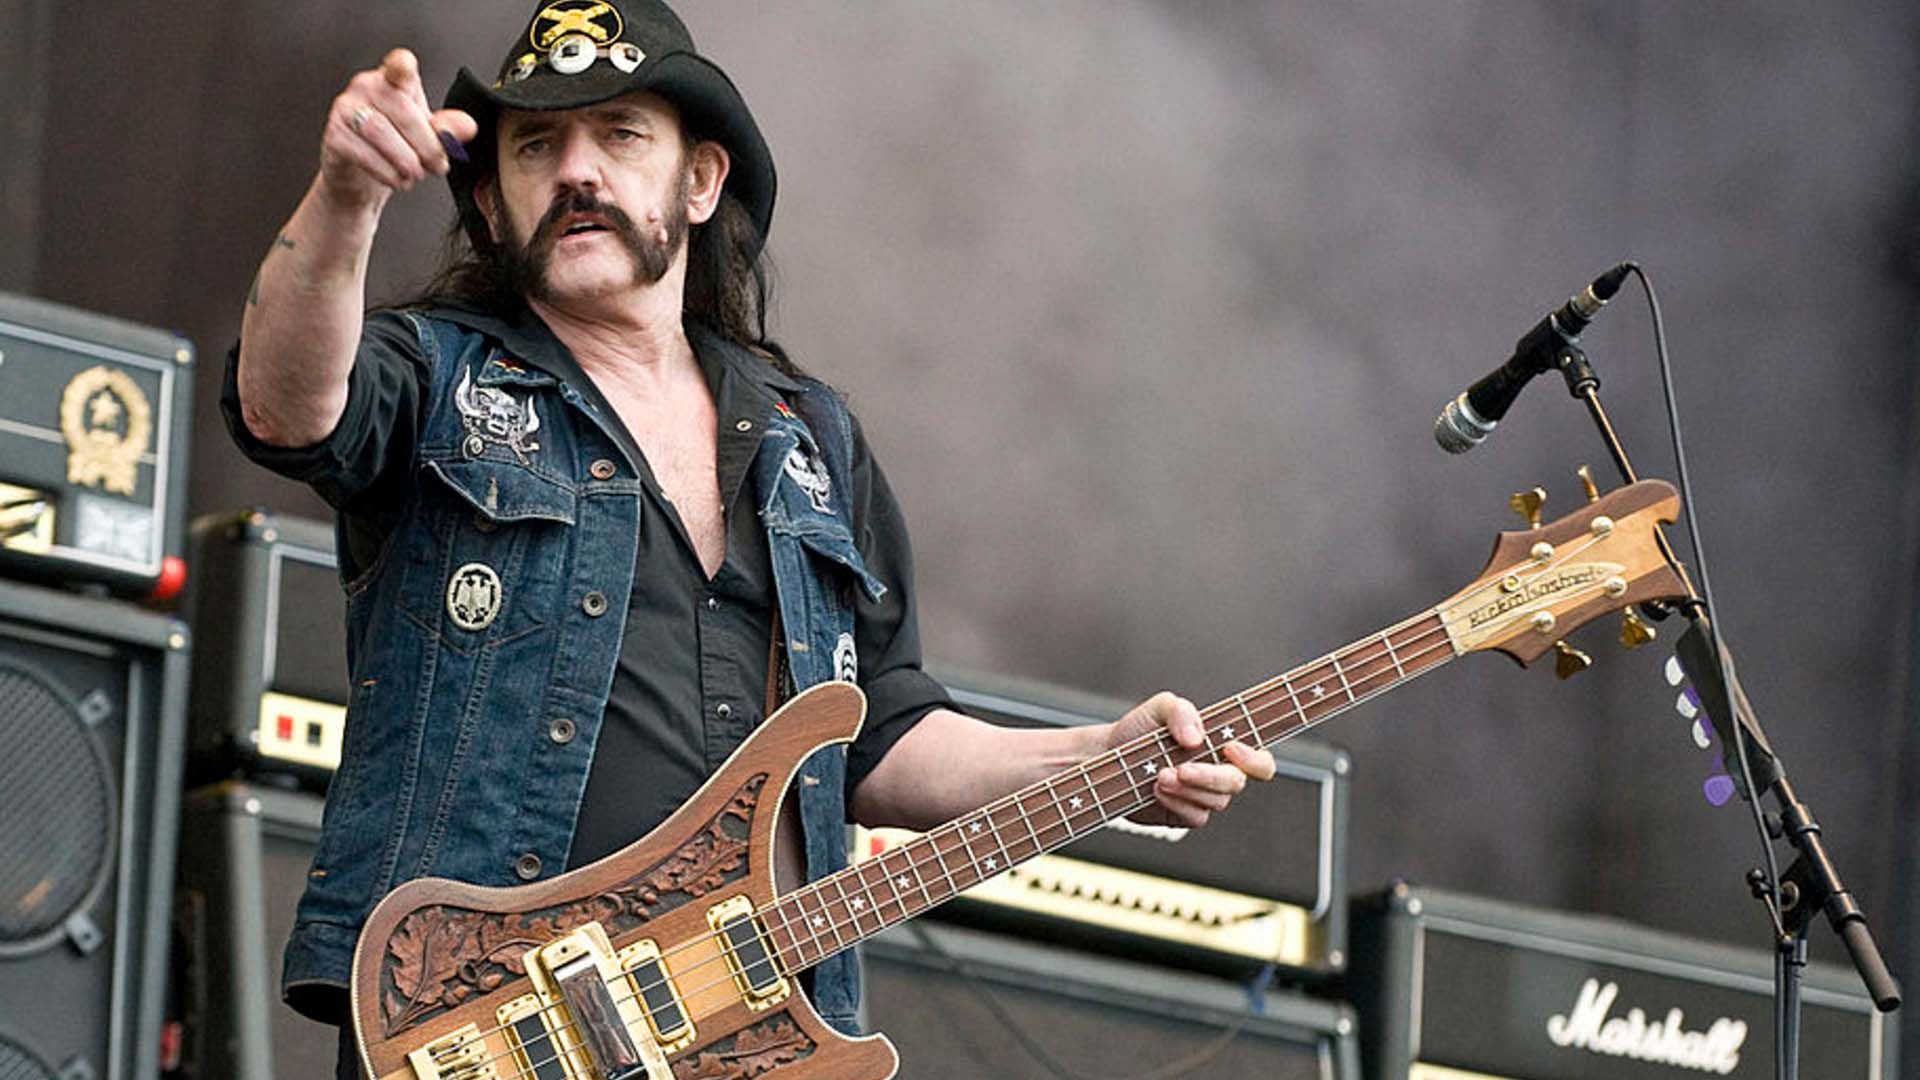 Photo of legendary rock n' roll frontman, Lemmy from Motörhead, performing live on stage.